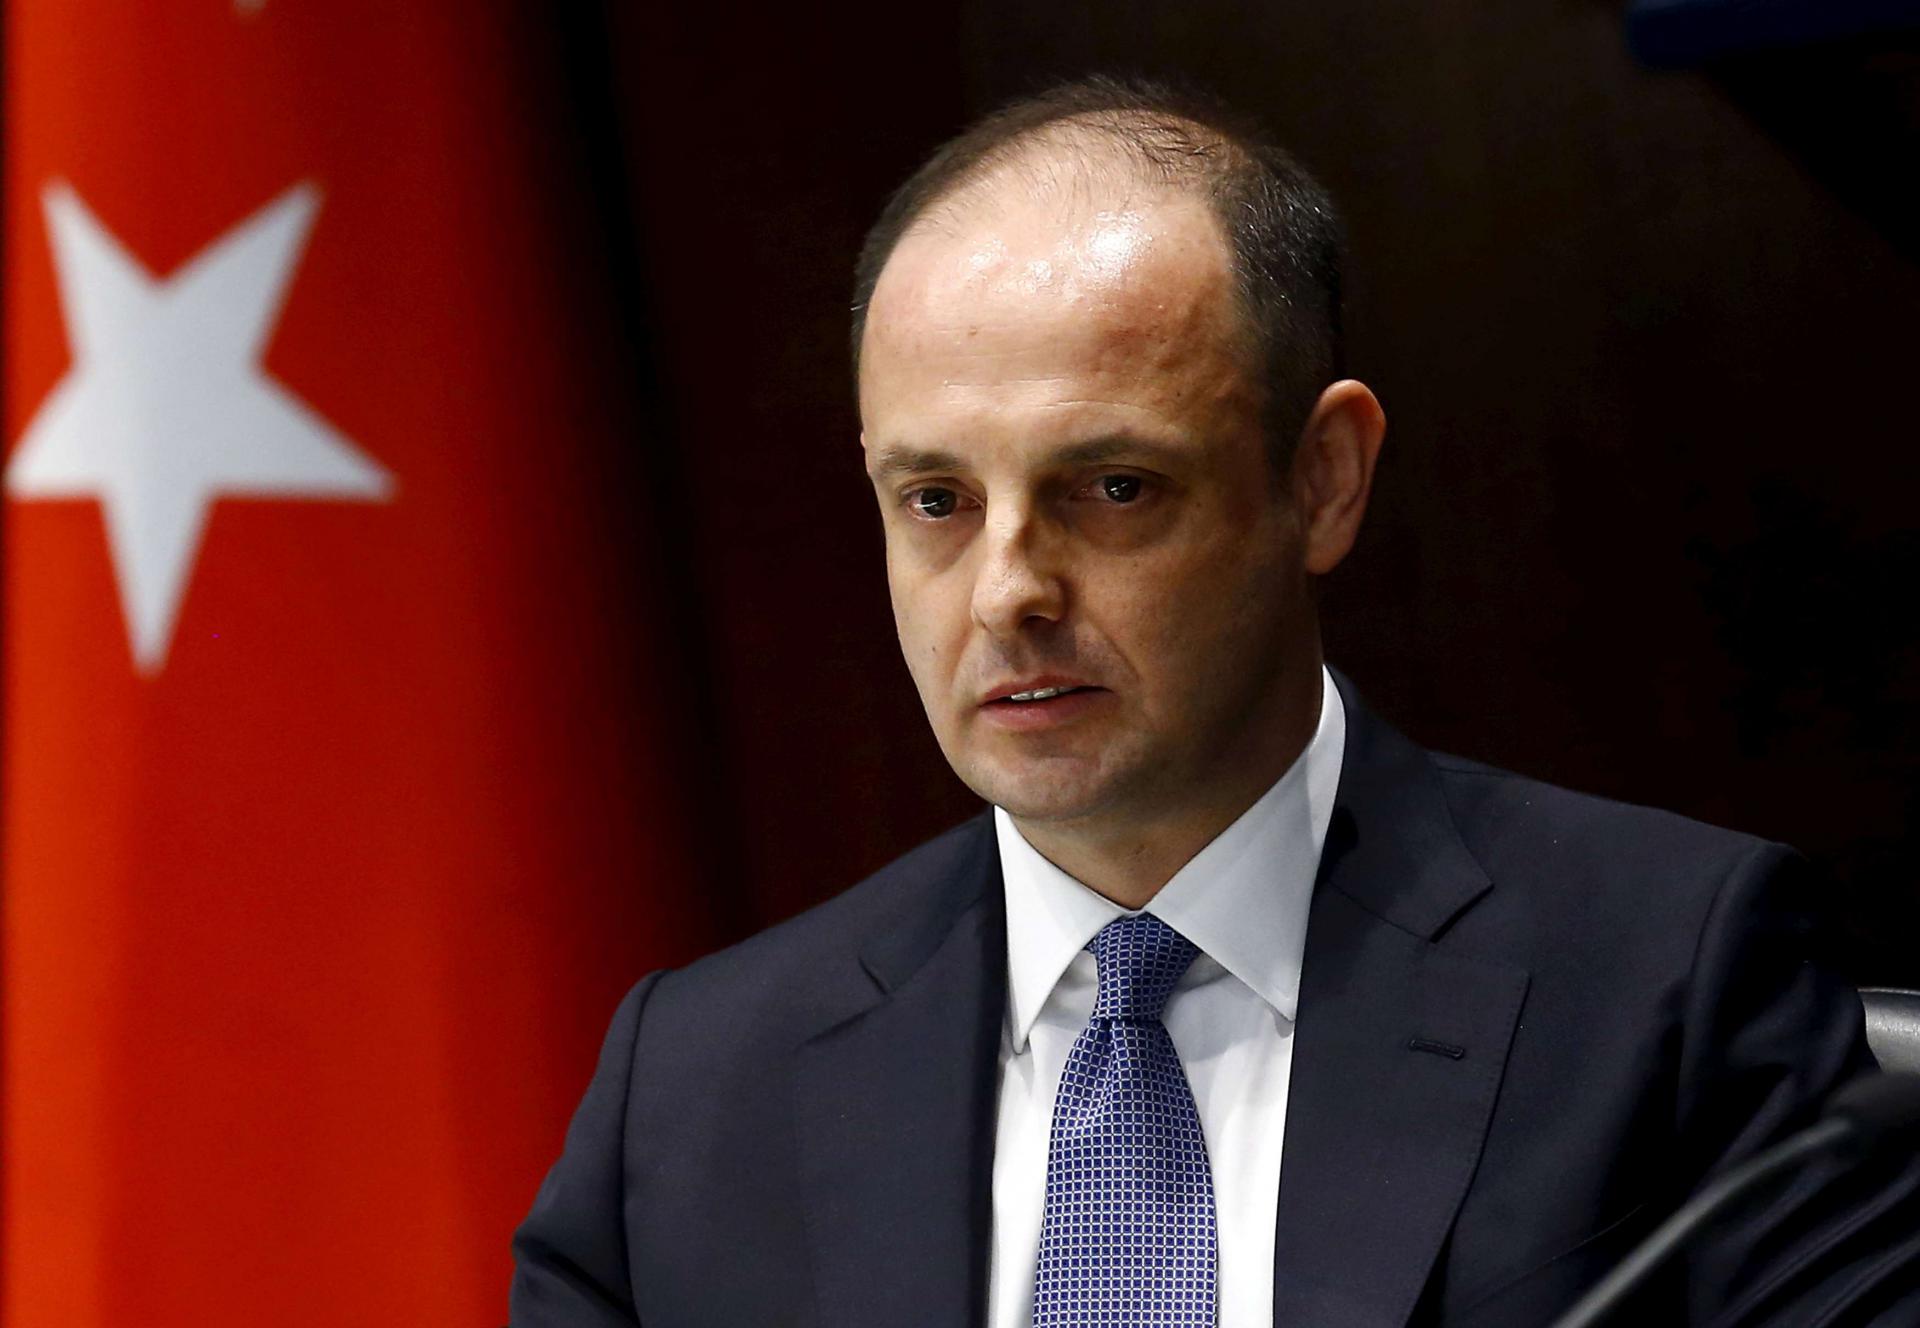 Turkey's former central bank governor Murat Cetinkaya was sacked by President Tayyip Erdogan earlier this month